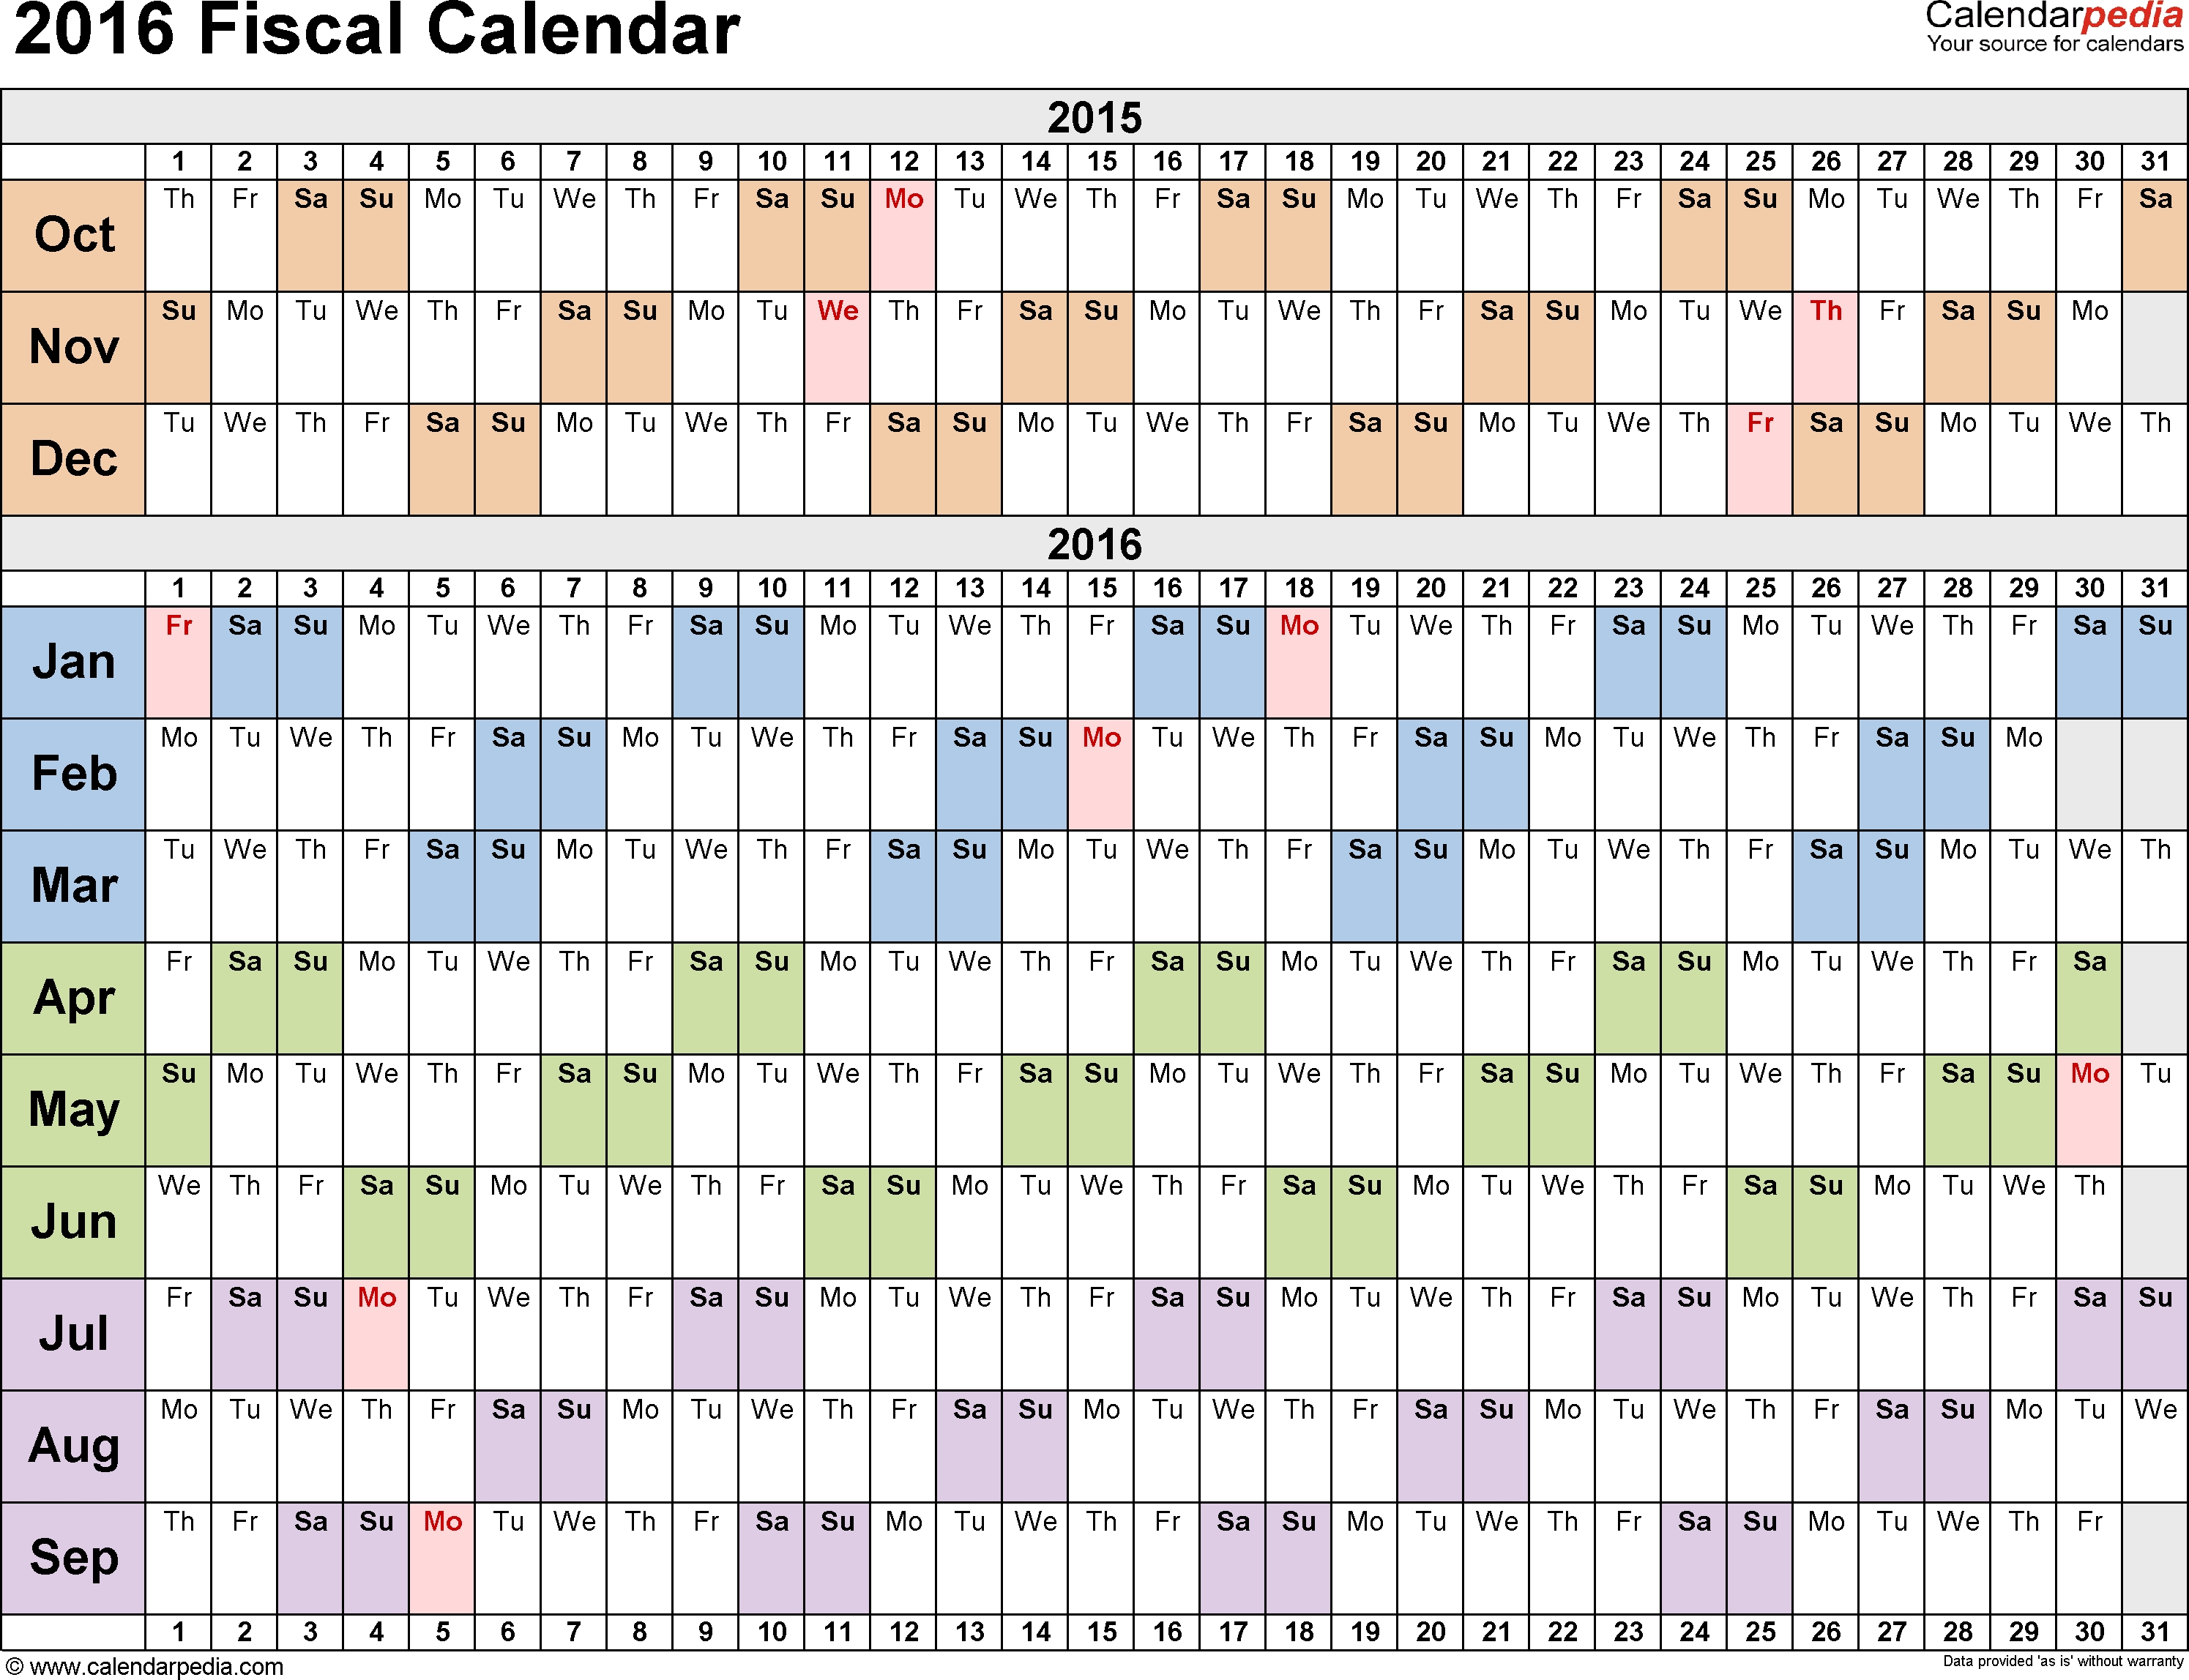 Fiscal Calendars 2016 - Free Printable Excel Templates